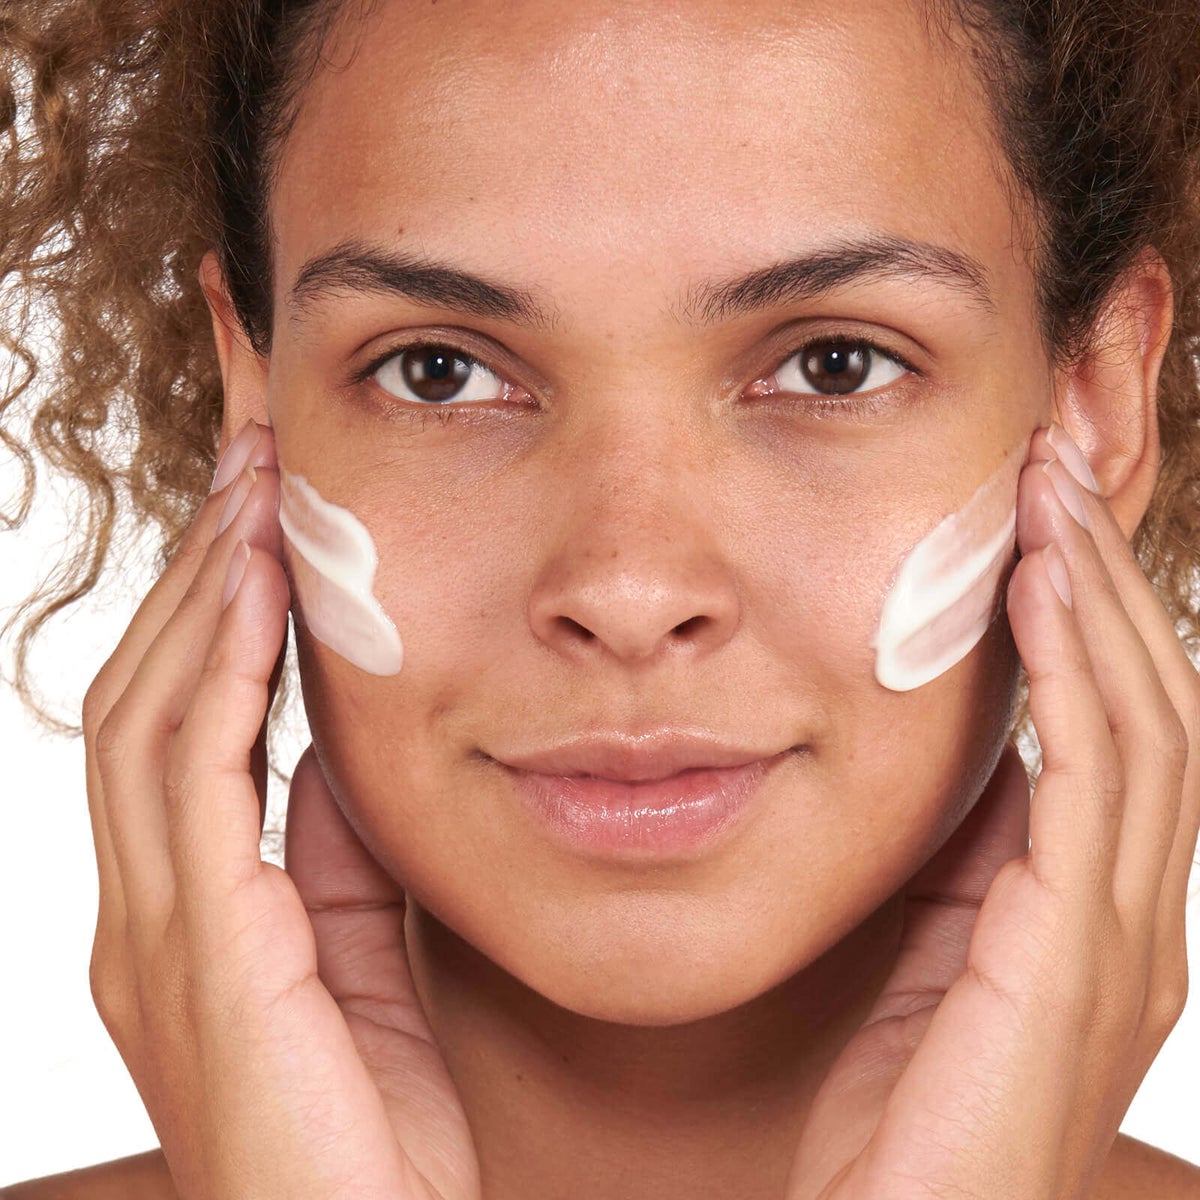 Woman applying No7 serum or moisturizer to her face